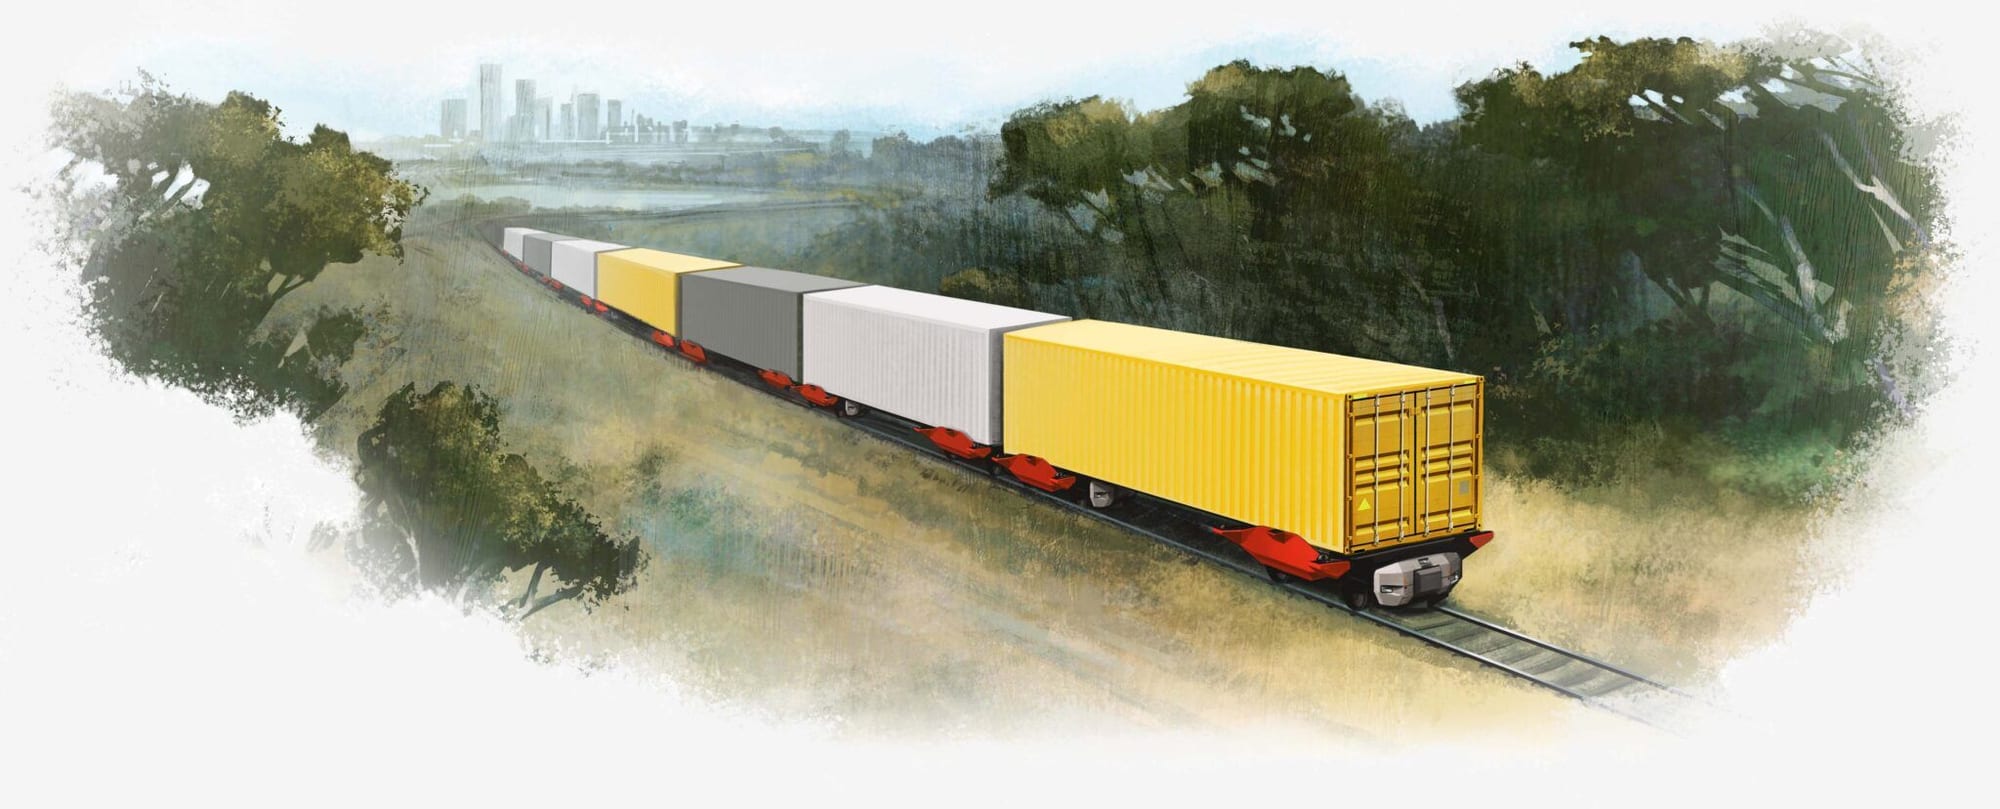 Artist's rendering of several shipping containers being transported by Parallel Systems electric freight trains. 